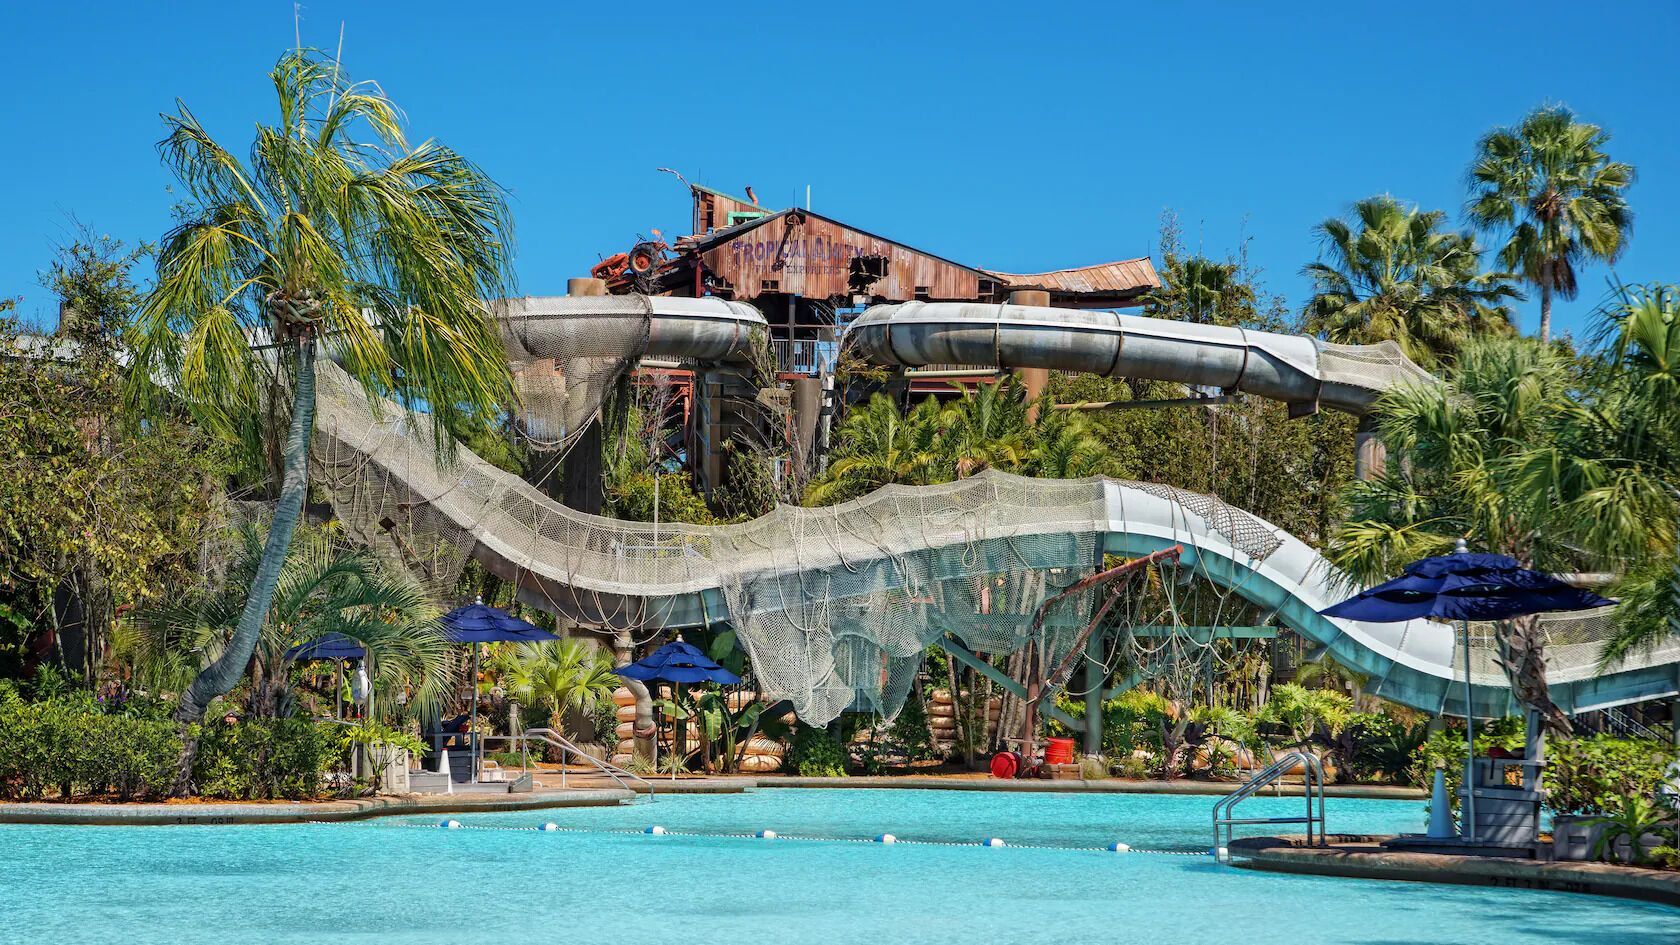 Top 10 water parks in Florida: Unique rides, crazy water slides, mermaid shows and LEGO rafts